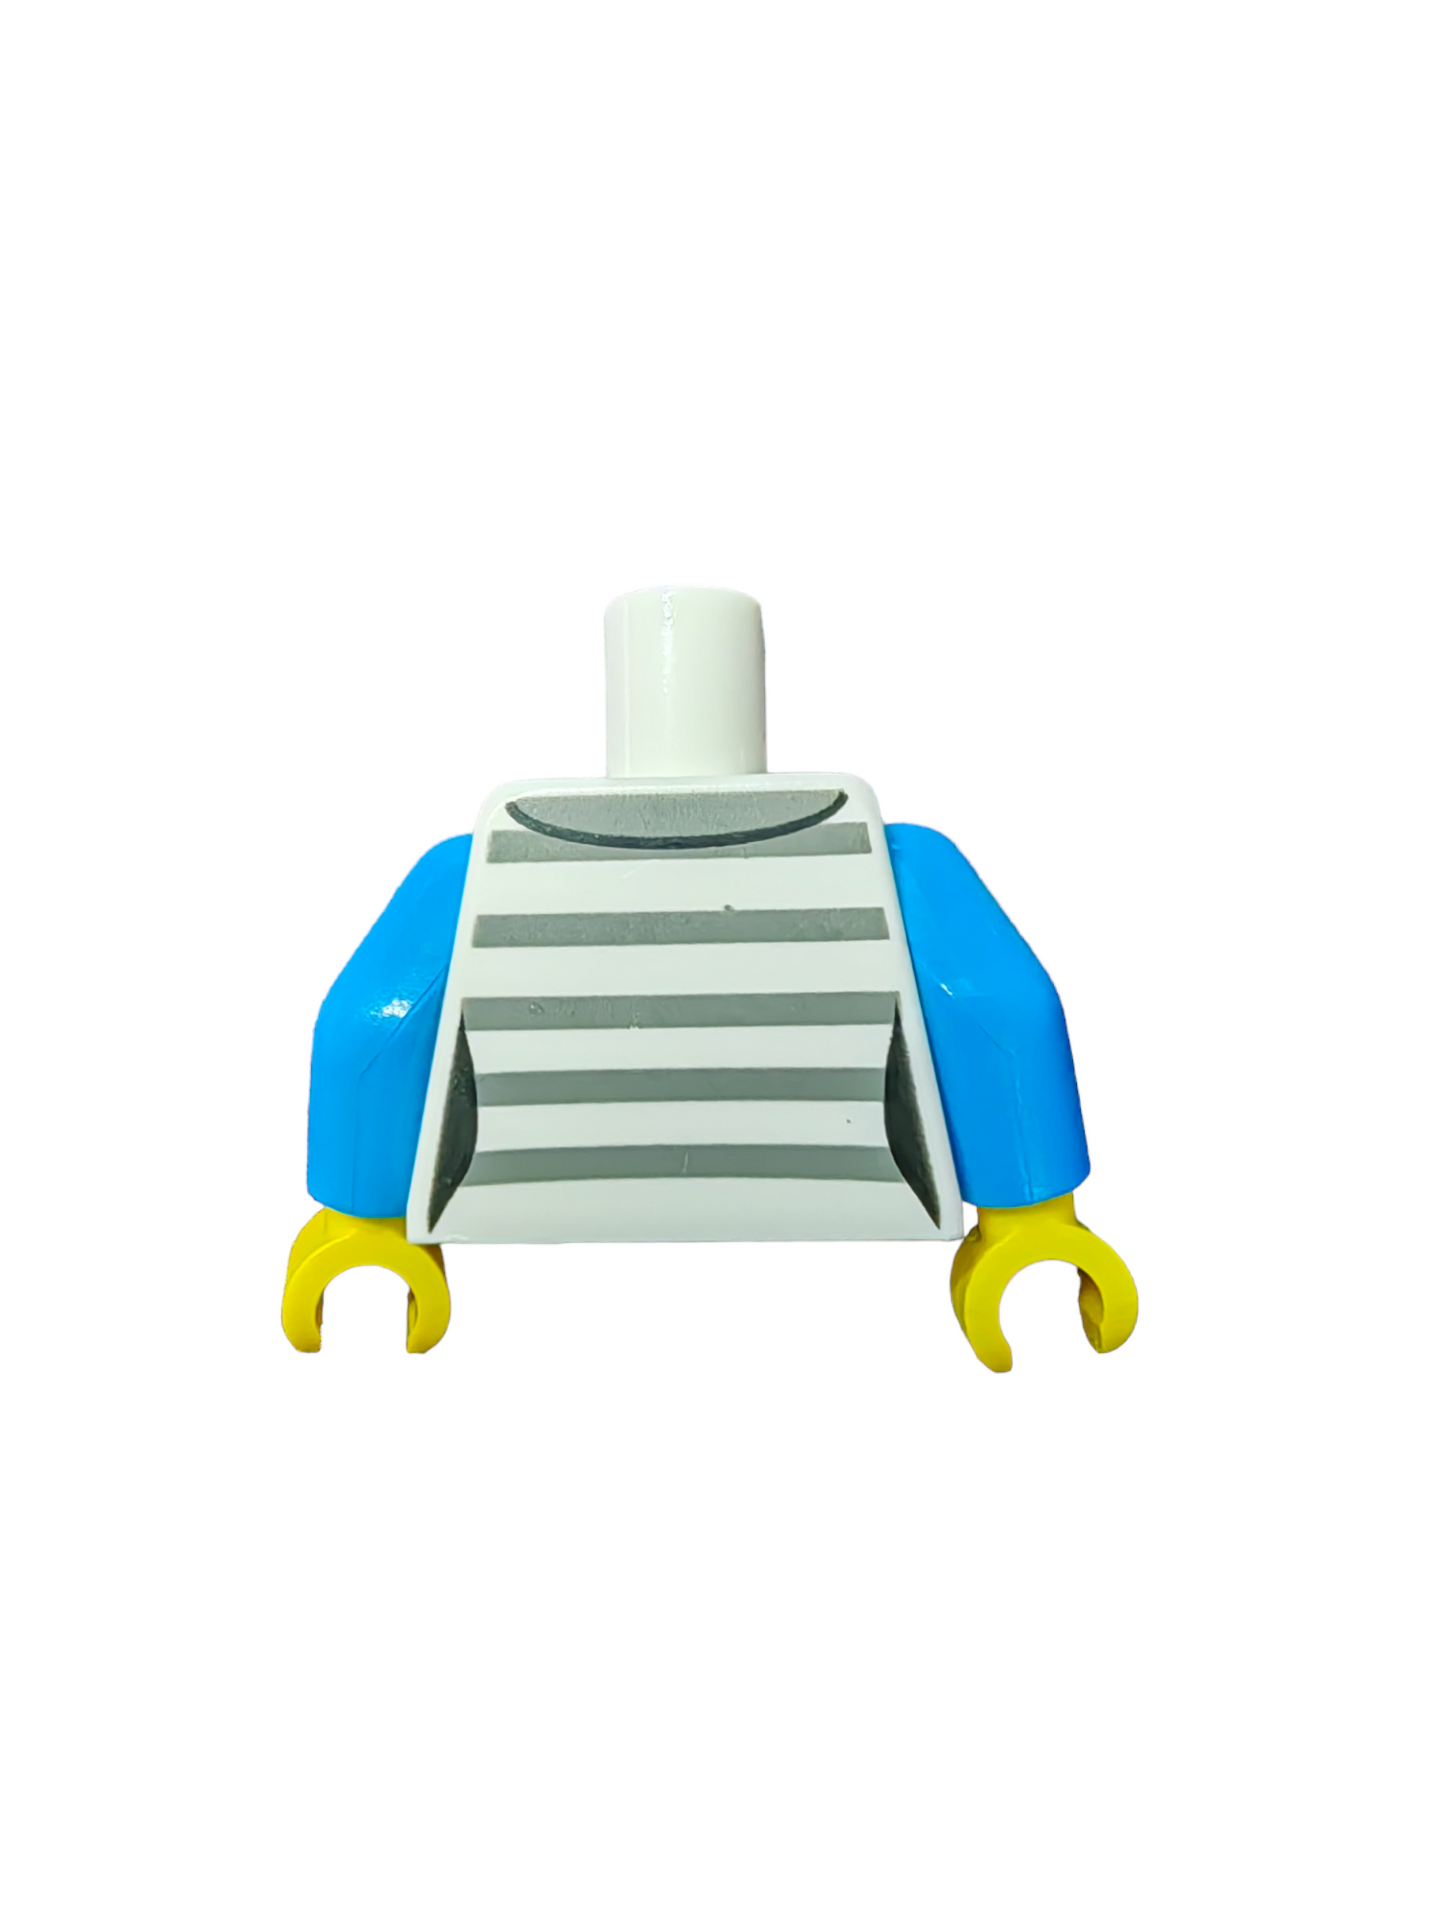 LEGO Torso, Jacket with Gray Prison Stripes over Azure Shirt, Pink Bow Tie - UB1120